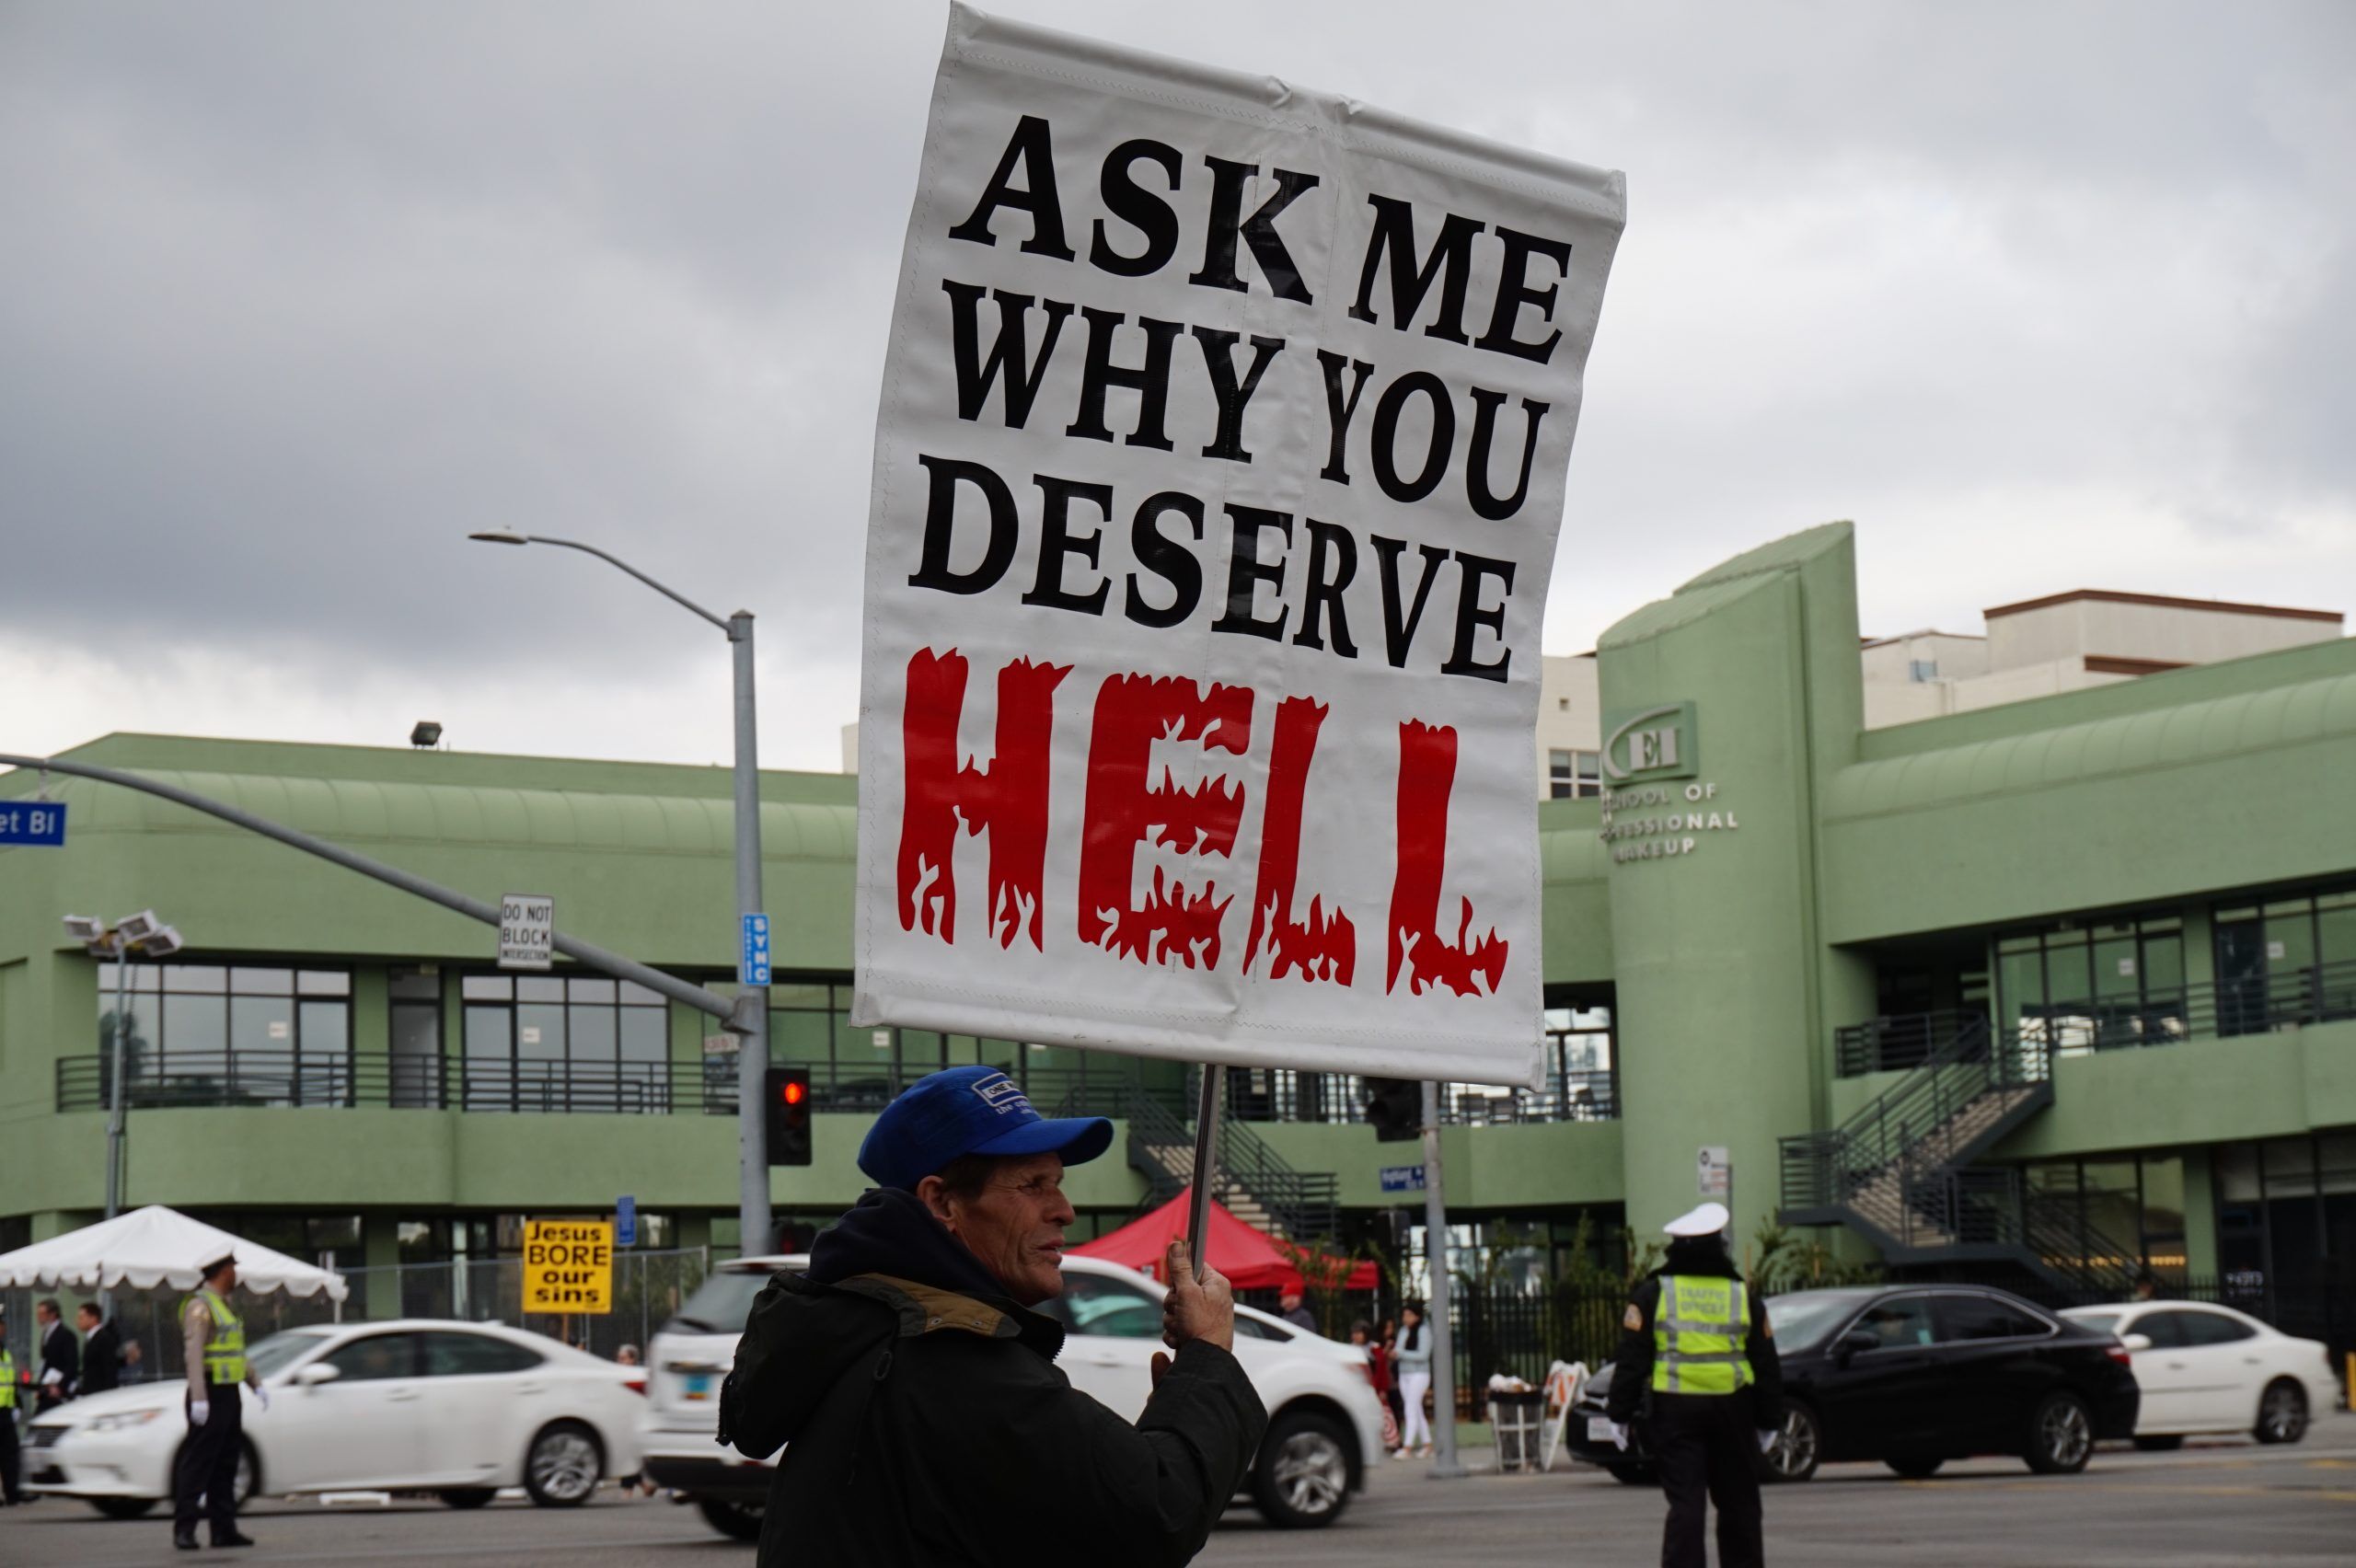 LOS ANGELES, FEB 26TH, 2017: A religious protester promises "hell" to passers-by on the eve of the 89th Academy Award ceremony.